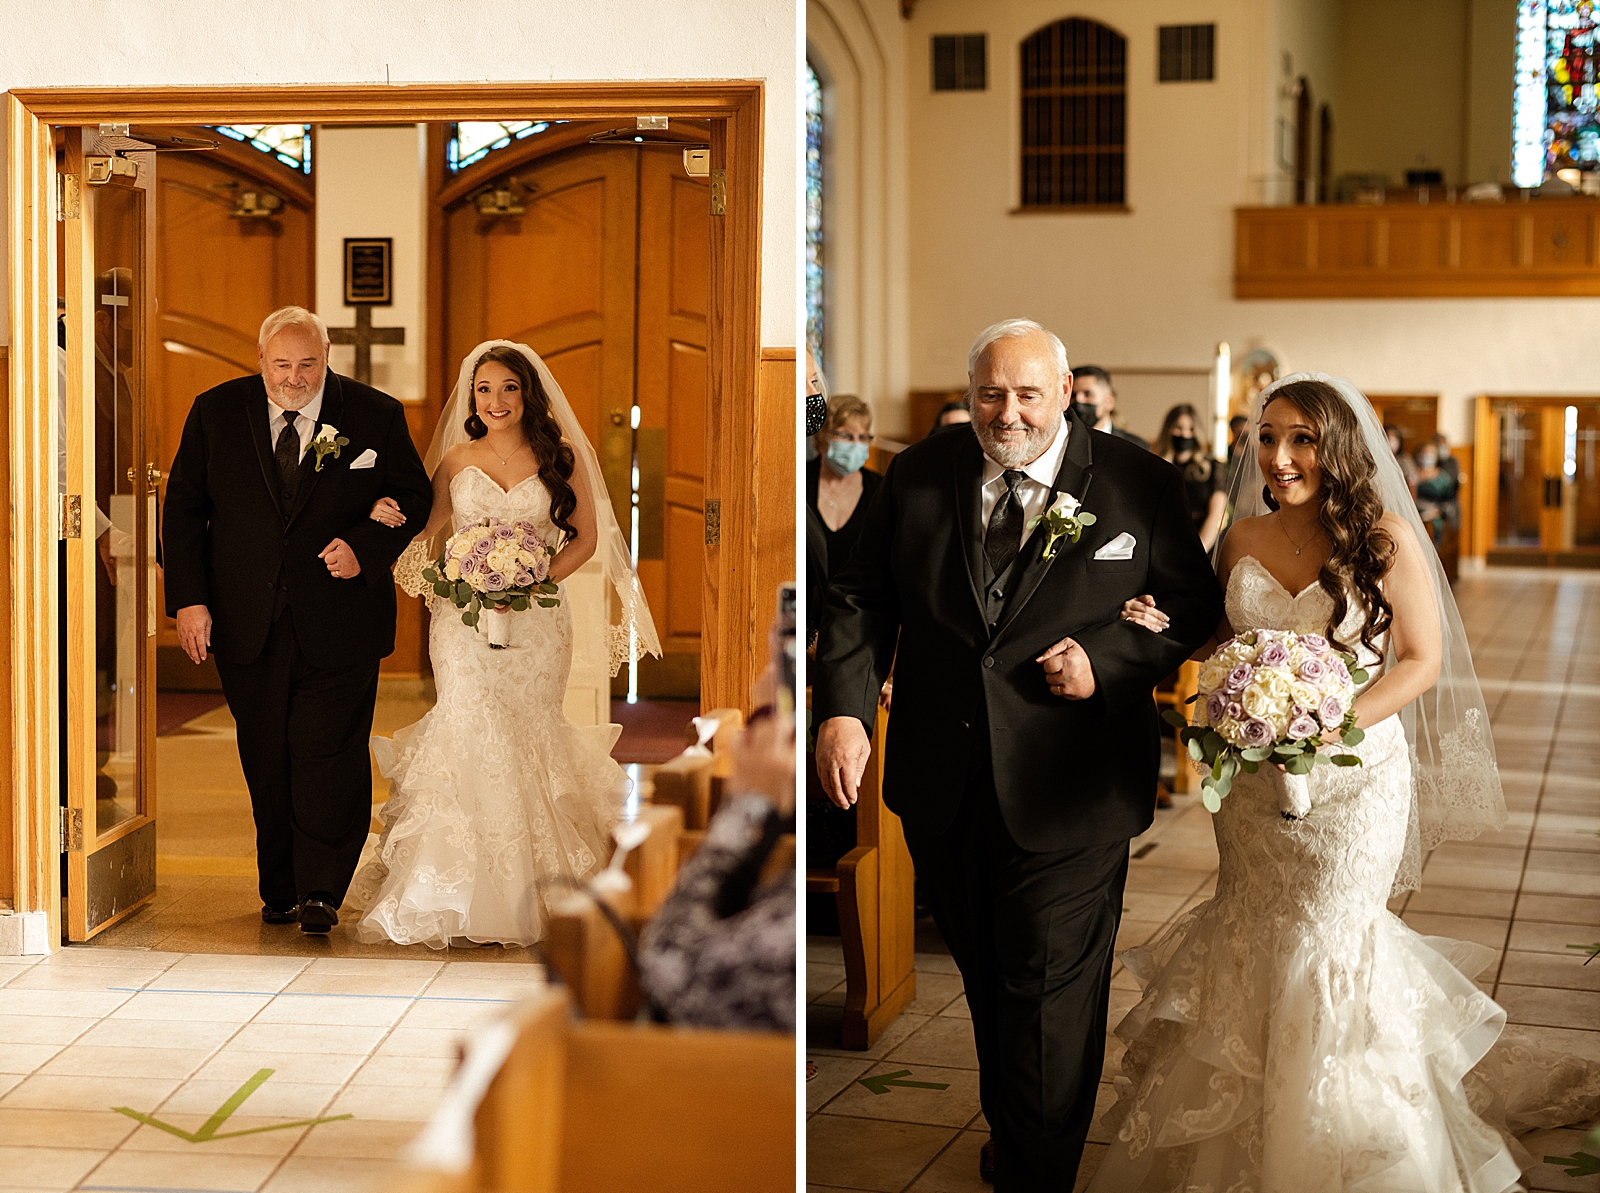 Father and Bride entering church Ceremony together